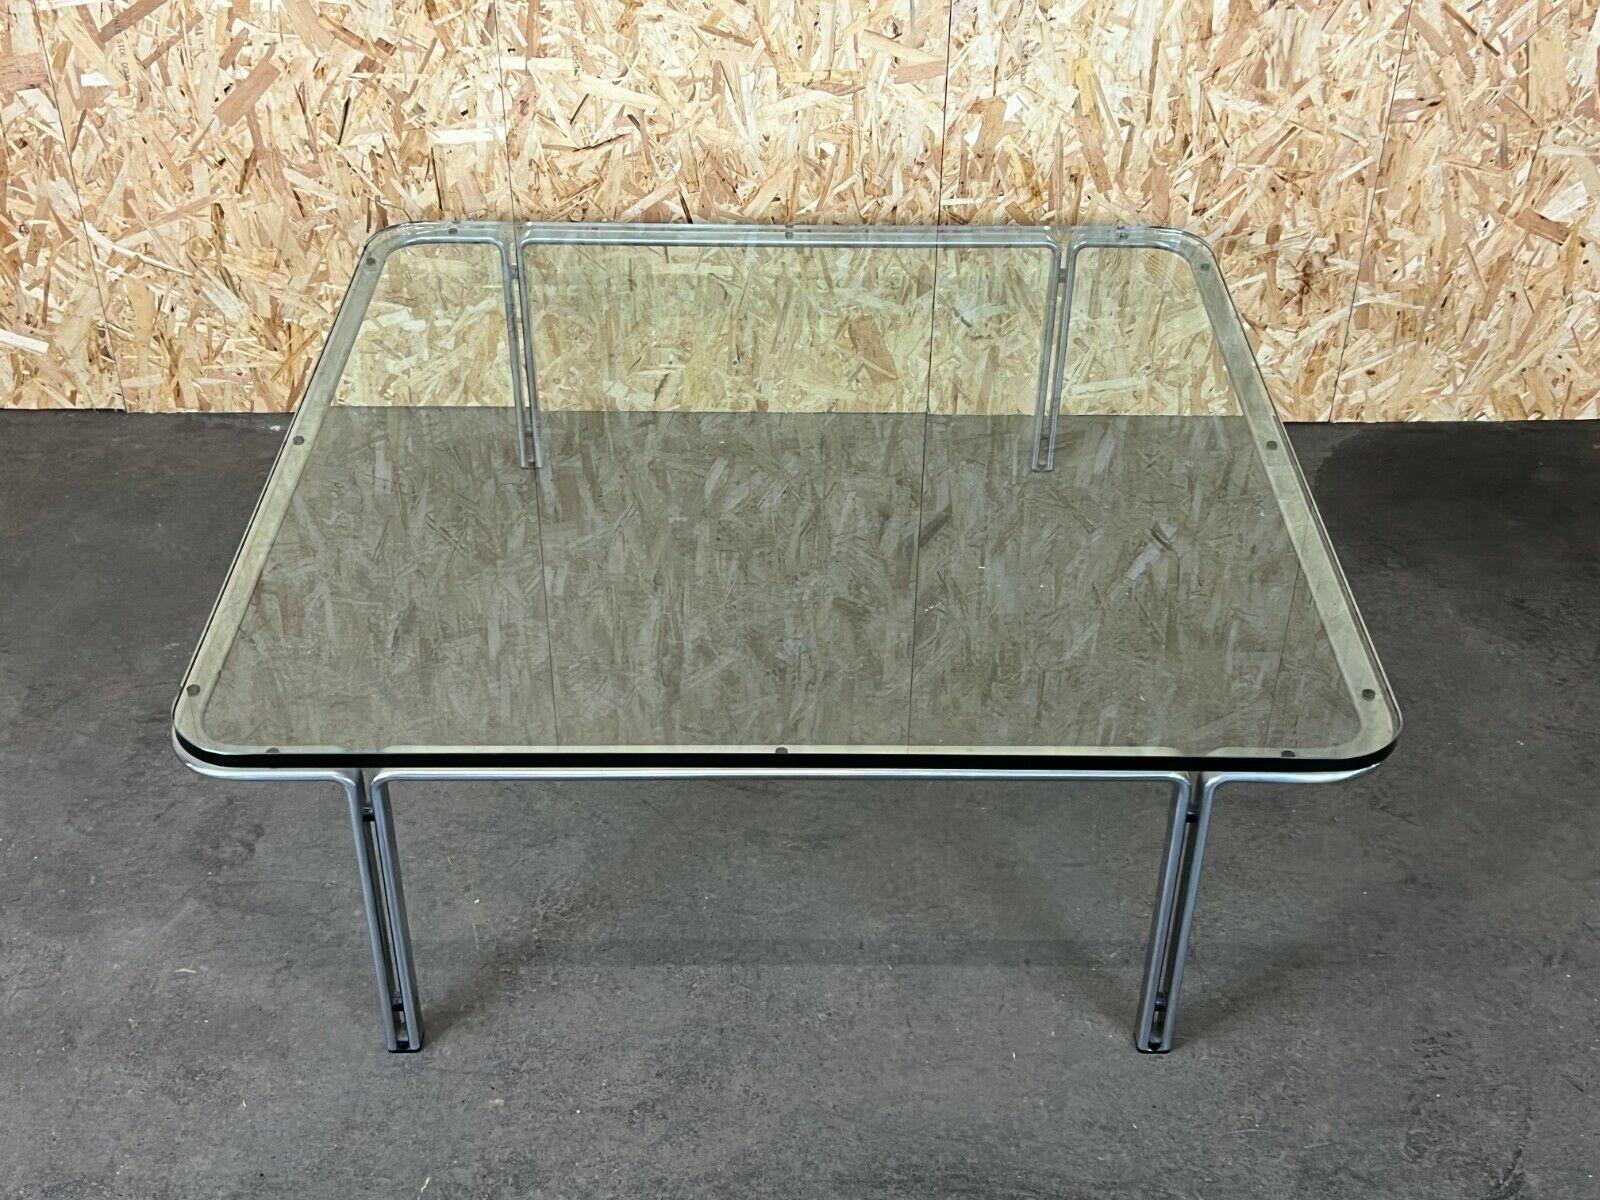 60s 70s Horst Brüning Coffee Table Kill International coffee table glass design

Objet : table basse

Fabricant : Kill International

Condition : bon - vintage

Âge : environ 1960-1970

Dimensions :

116cm x 116cm x 40cm

Autres notes